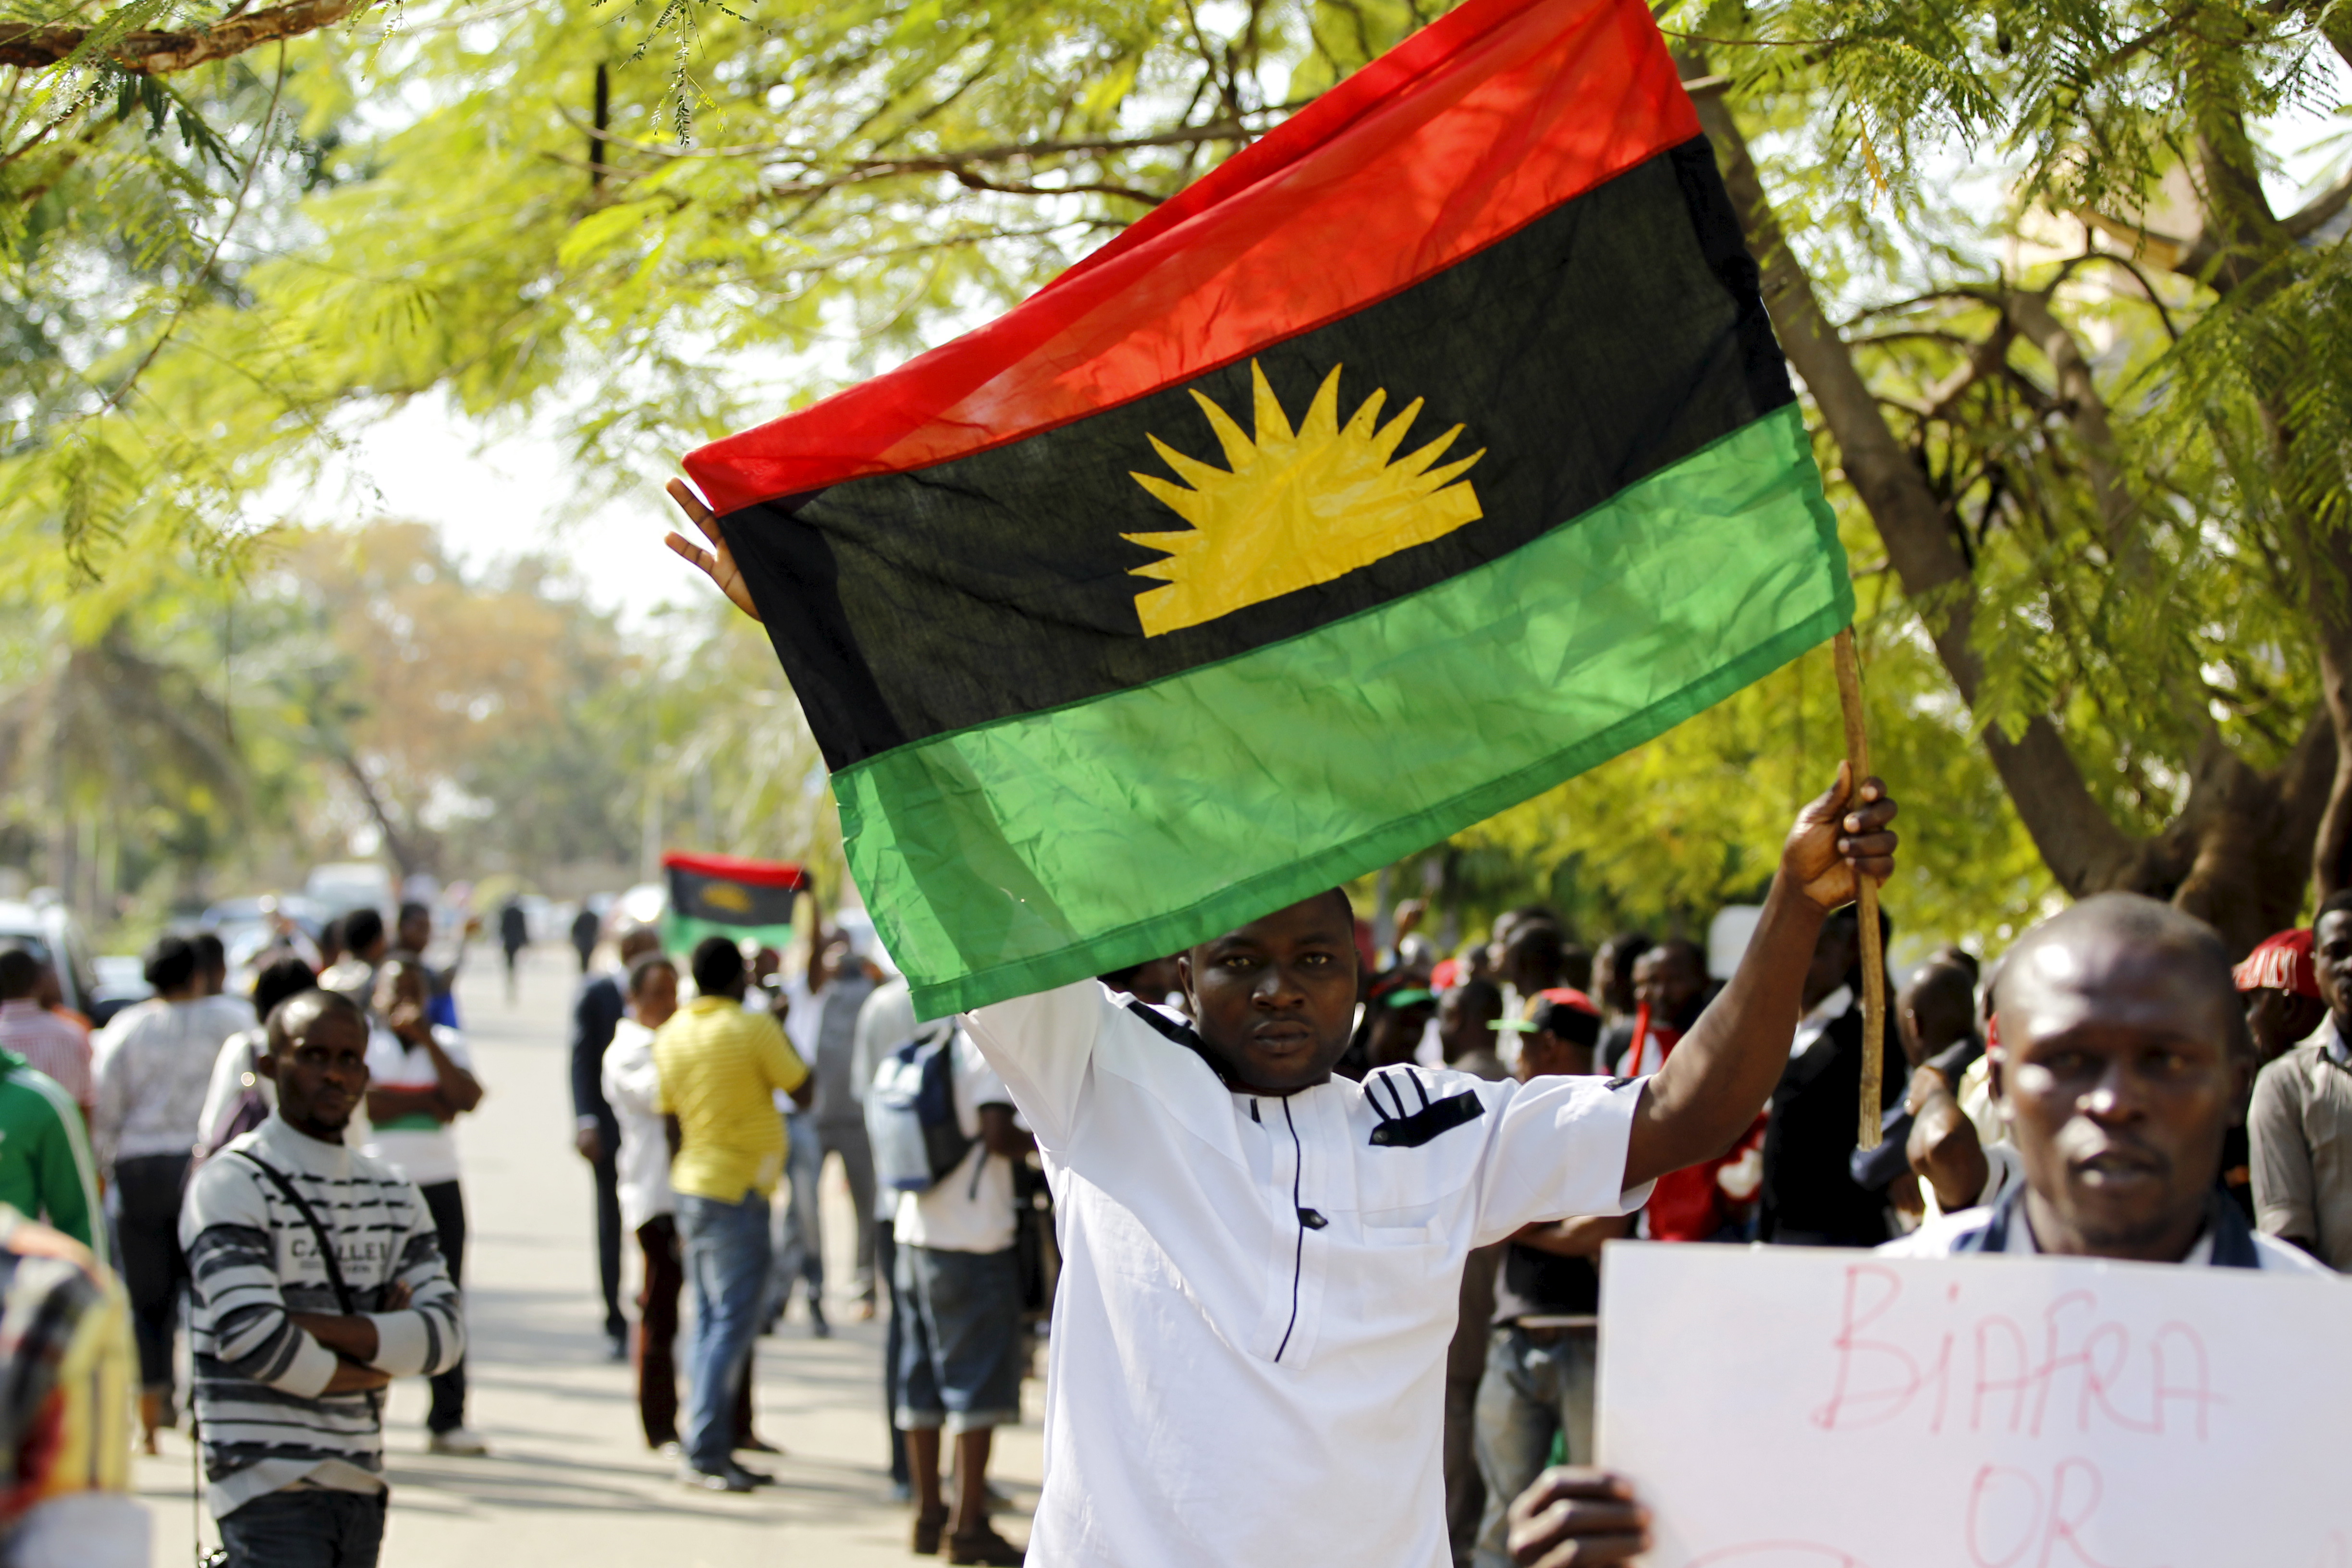 Army arrests IPOB members in Abia for disrupting church service